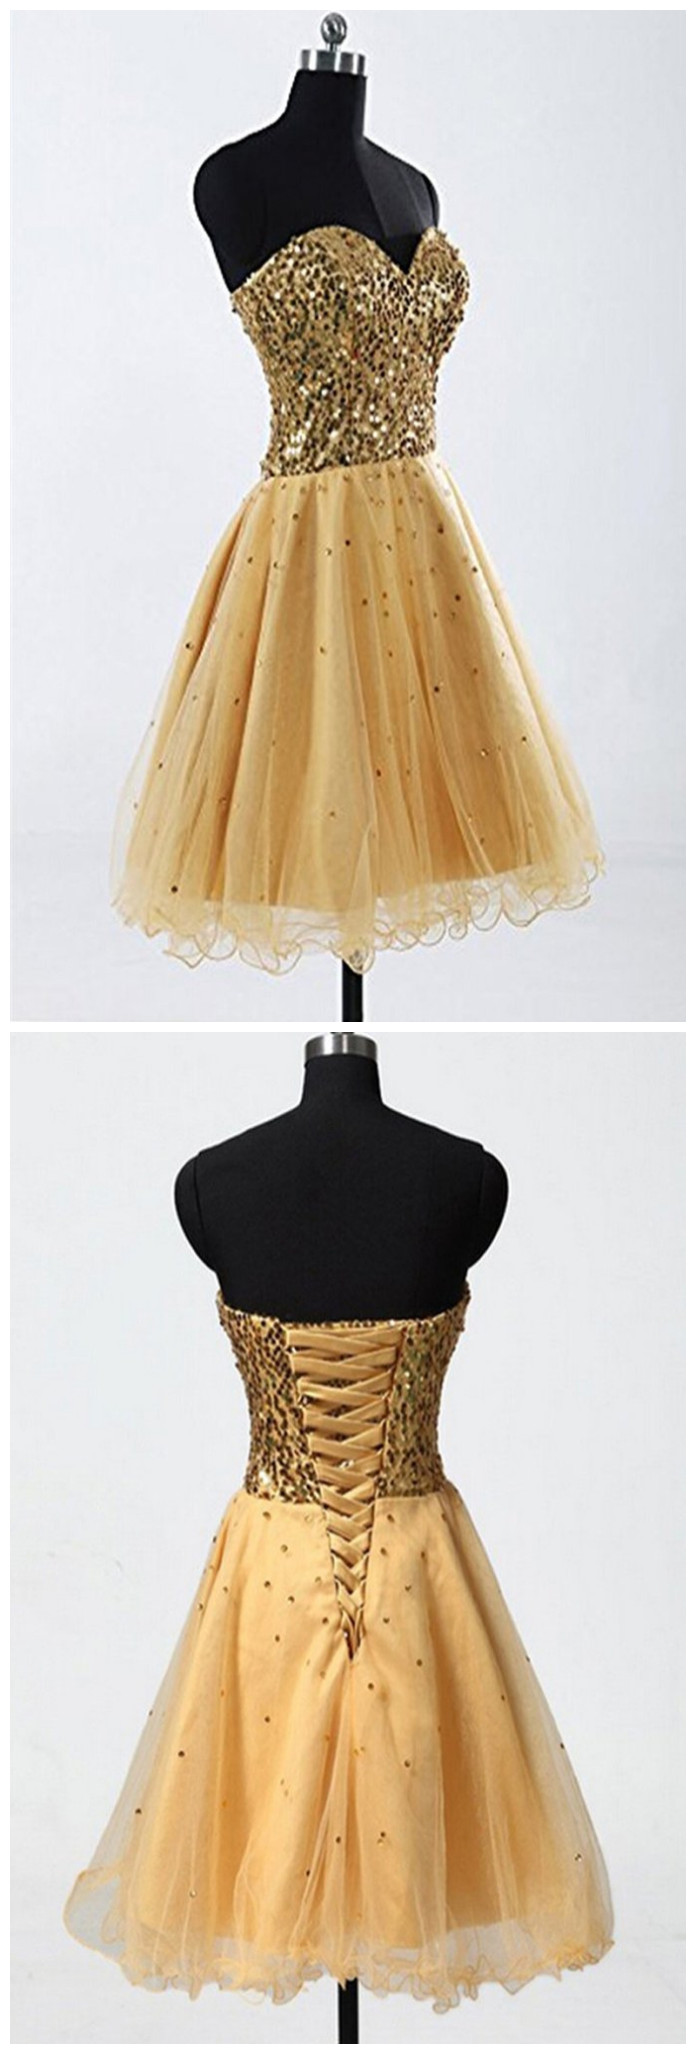 Gold Sweetheart Beaded Backless Back Up Lace Homecoming Dresses